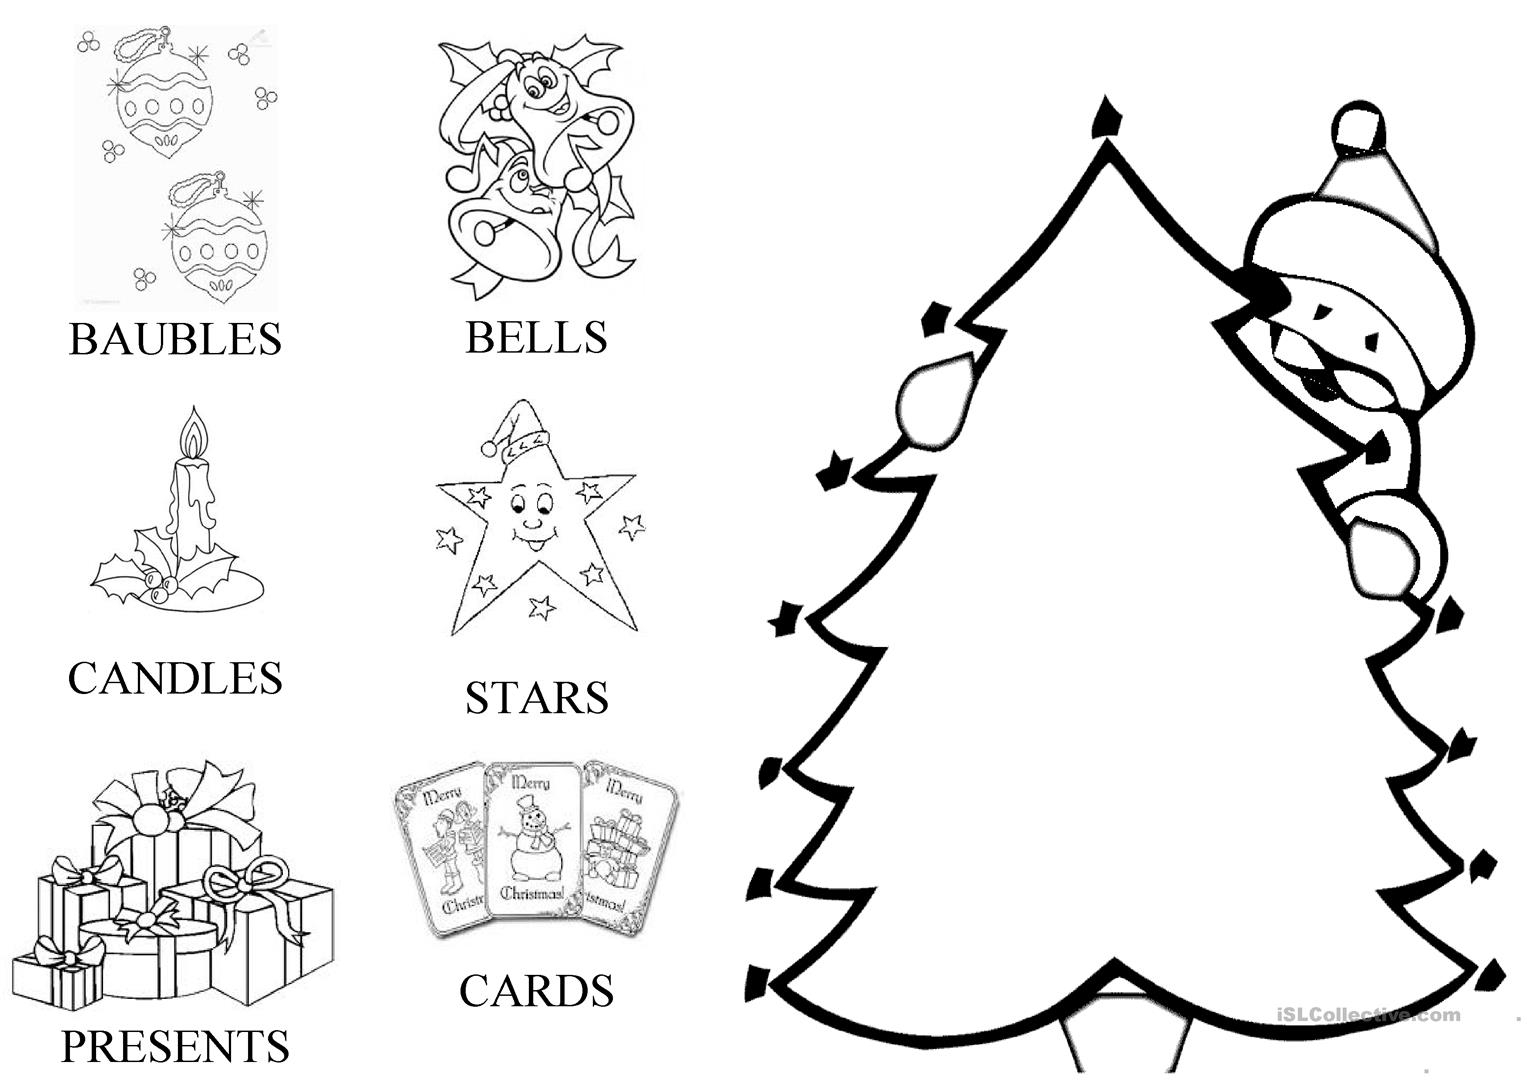 Christmas Card. Decorate The Tree - English Esl Worksheets